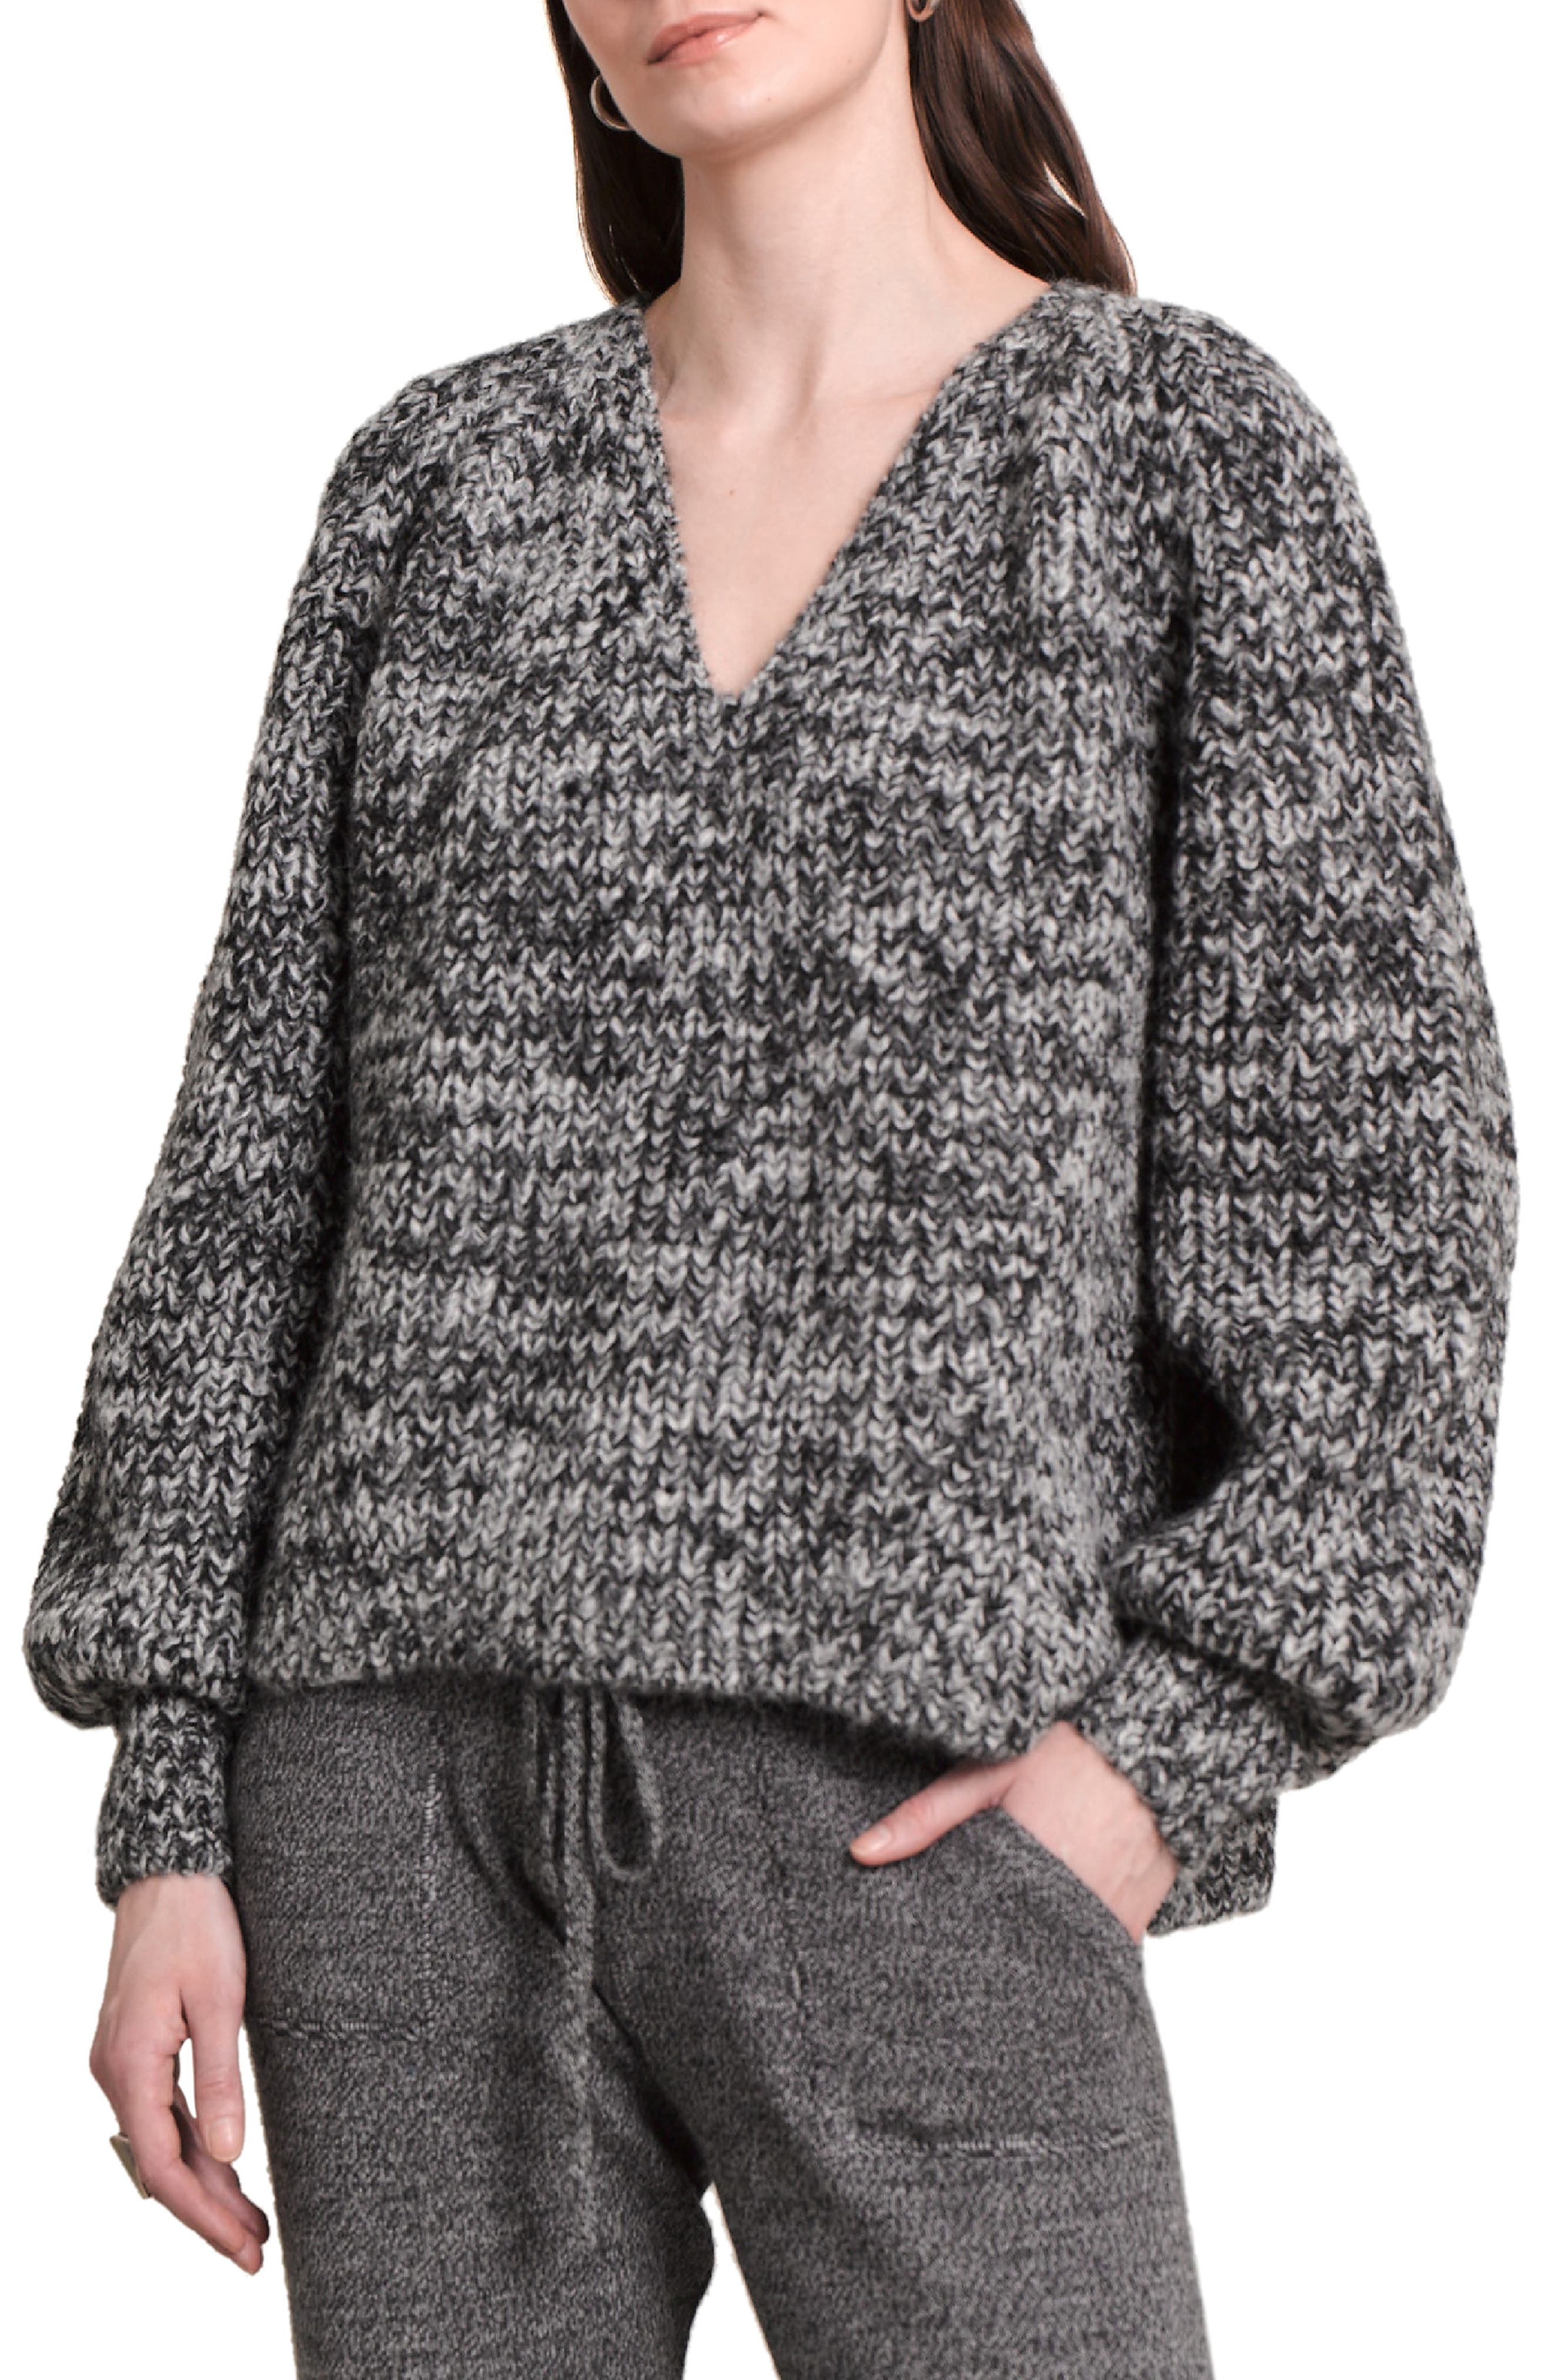 Eleven Six Tess Alpaca Blend Sweater in Salt And Pepper at Nordstrom